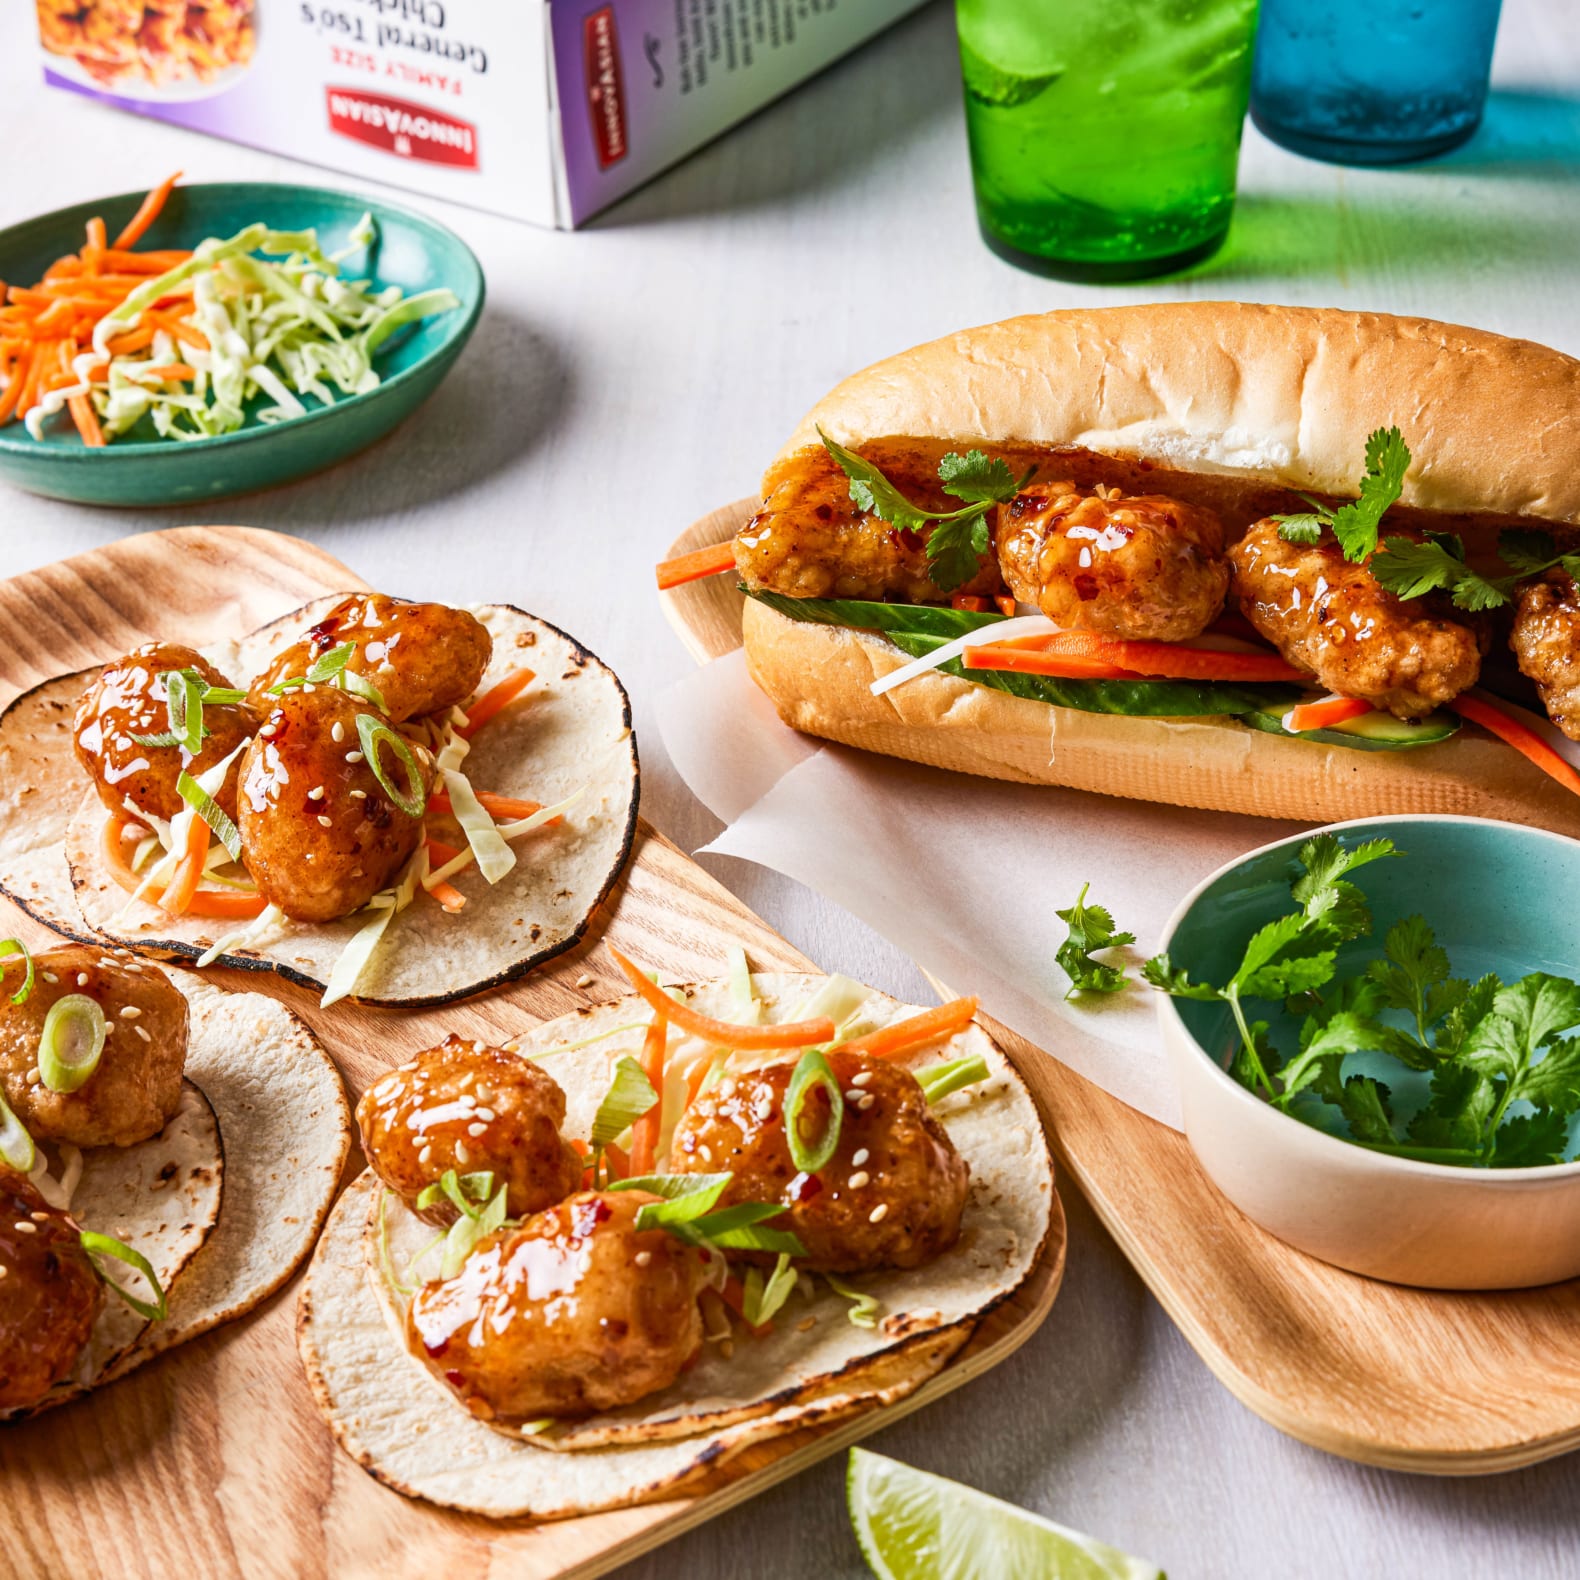 General Tso's Chicken prepared in two different ways: one as a Bahn Mi sandwhich and the other as small street tacos. Around them are cut vegetables and garnishes and the box of InnovAsain General Tso's Chicken, showing they were just prepared.